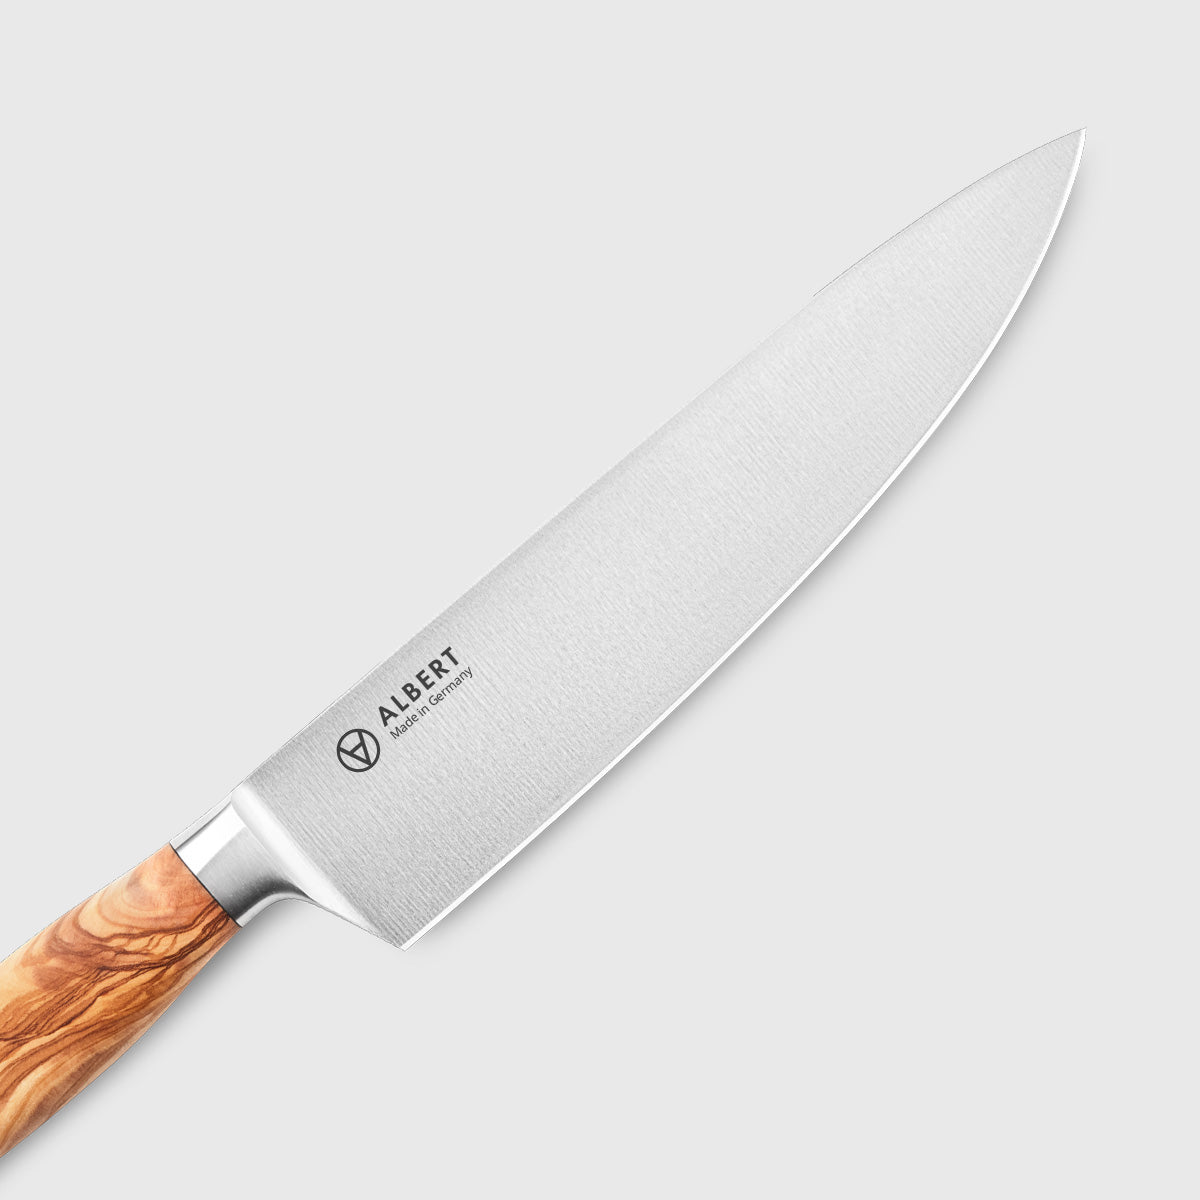 Astercook Chef Knife, 8 Inch Professional Kitchen Chef Knife, German High  Carbon Stainless Steel Ultra Sharp Knife, Chefs Knives with Ergonomic  Handle